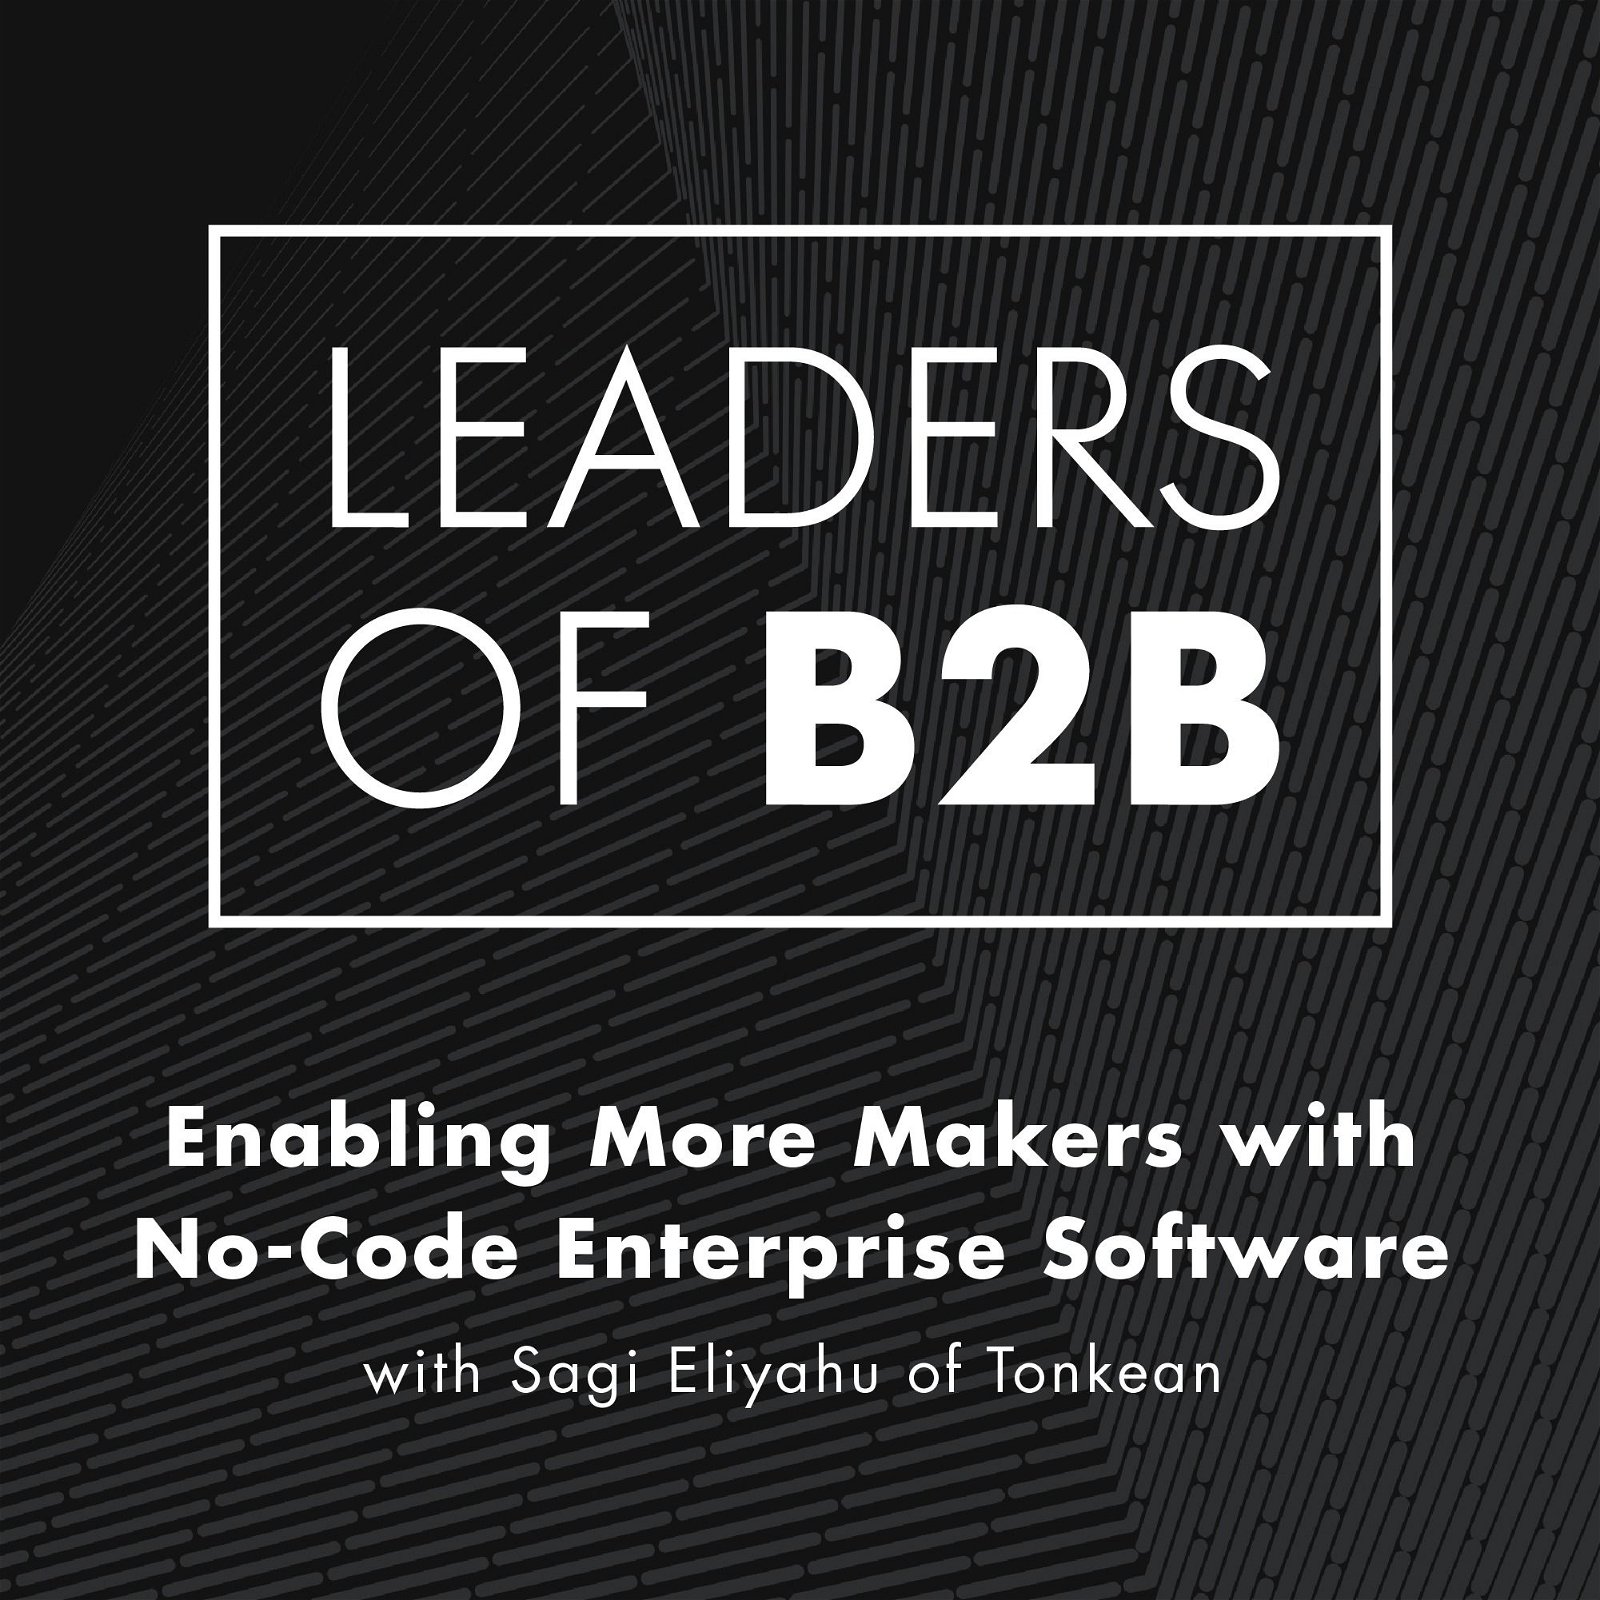 Enabling More Makers with No-Code Enterprise Software with Sagi Eliyahu of Tonkean